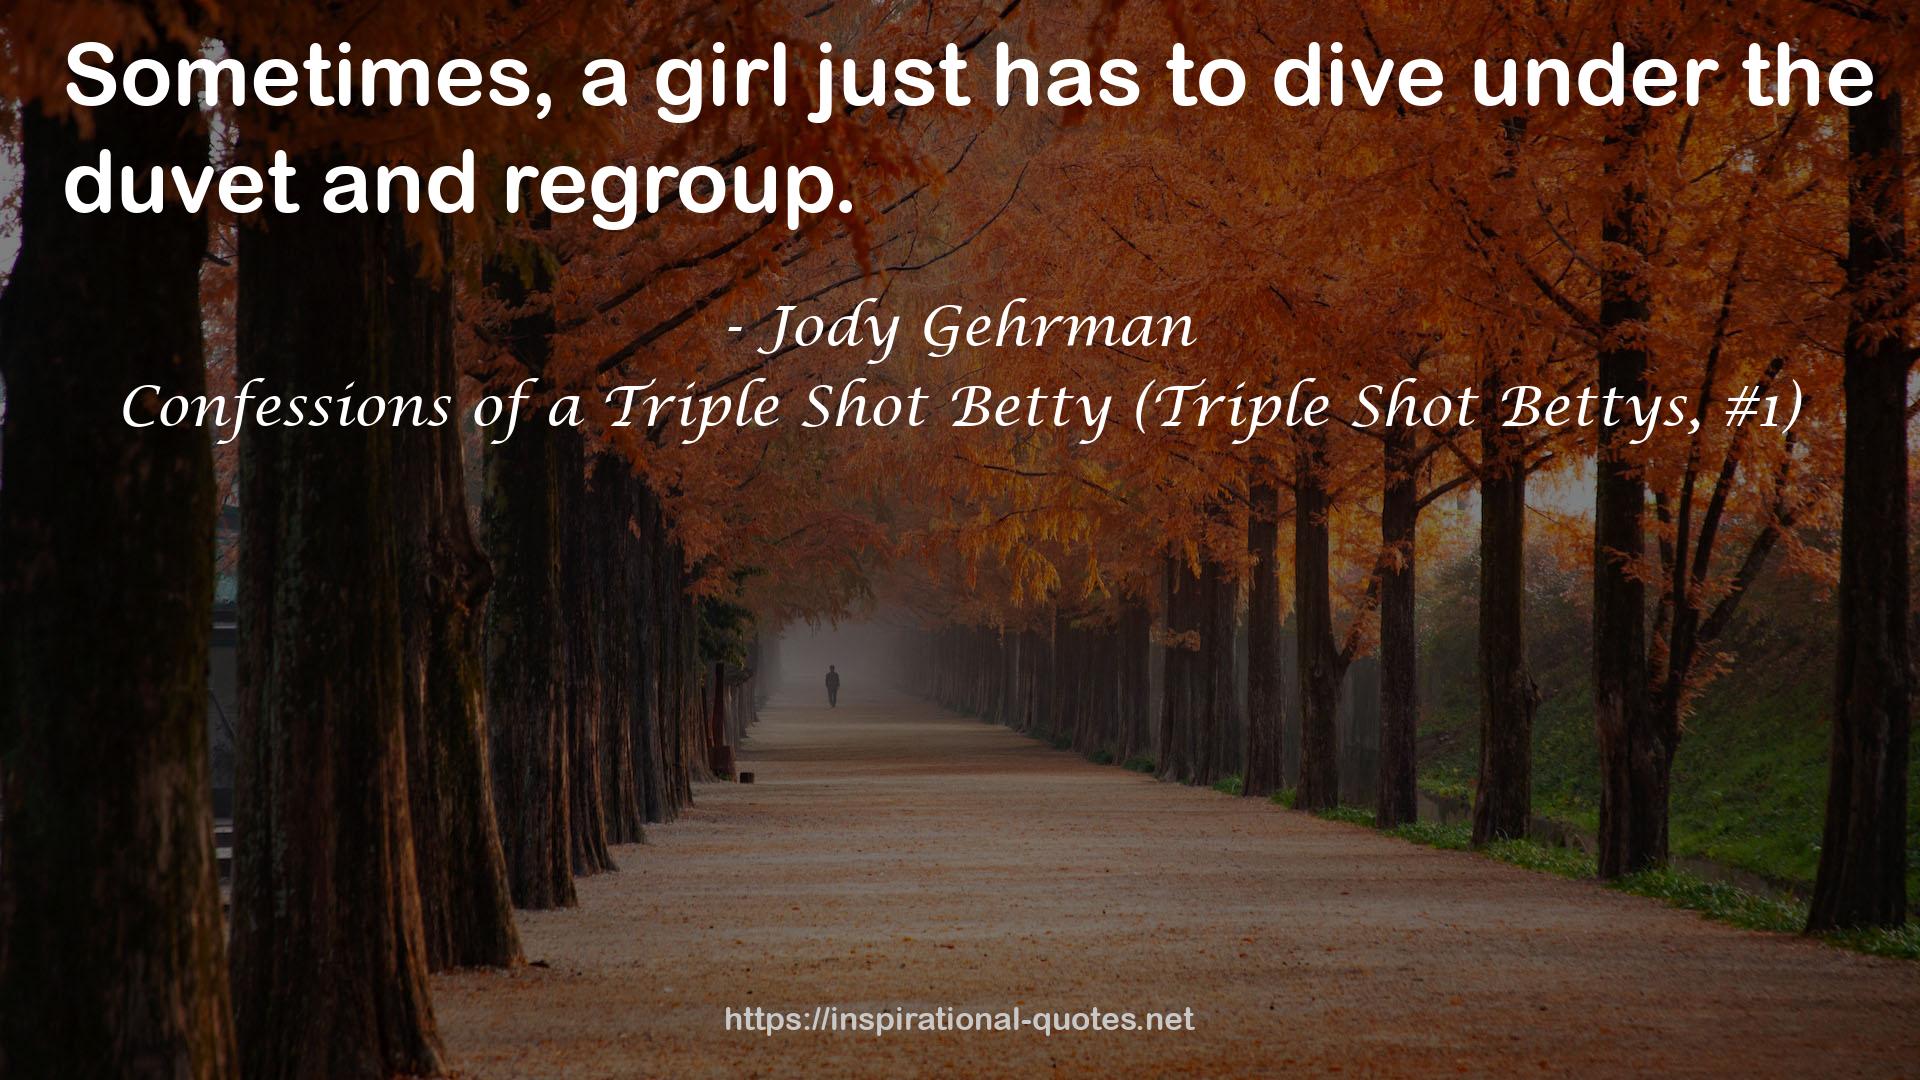 Confessions of a Triple Shot Betty (Triple Shot Bettys, #1) QUOTES